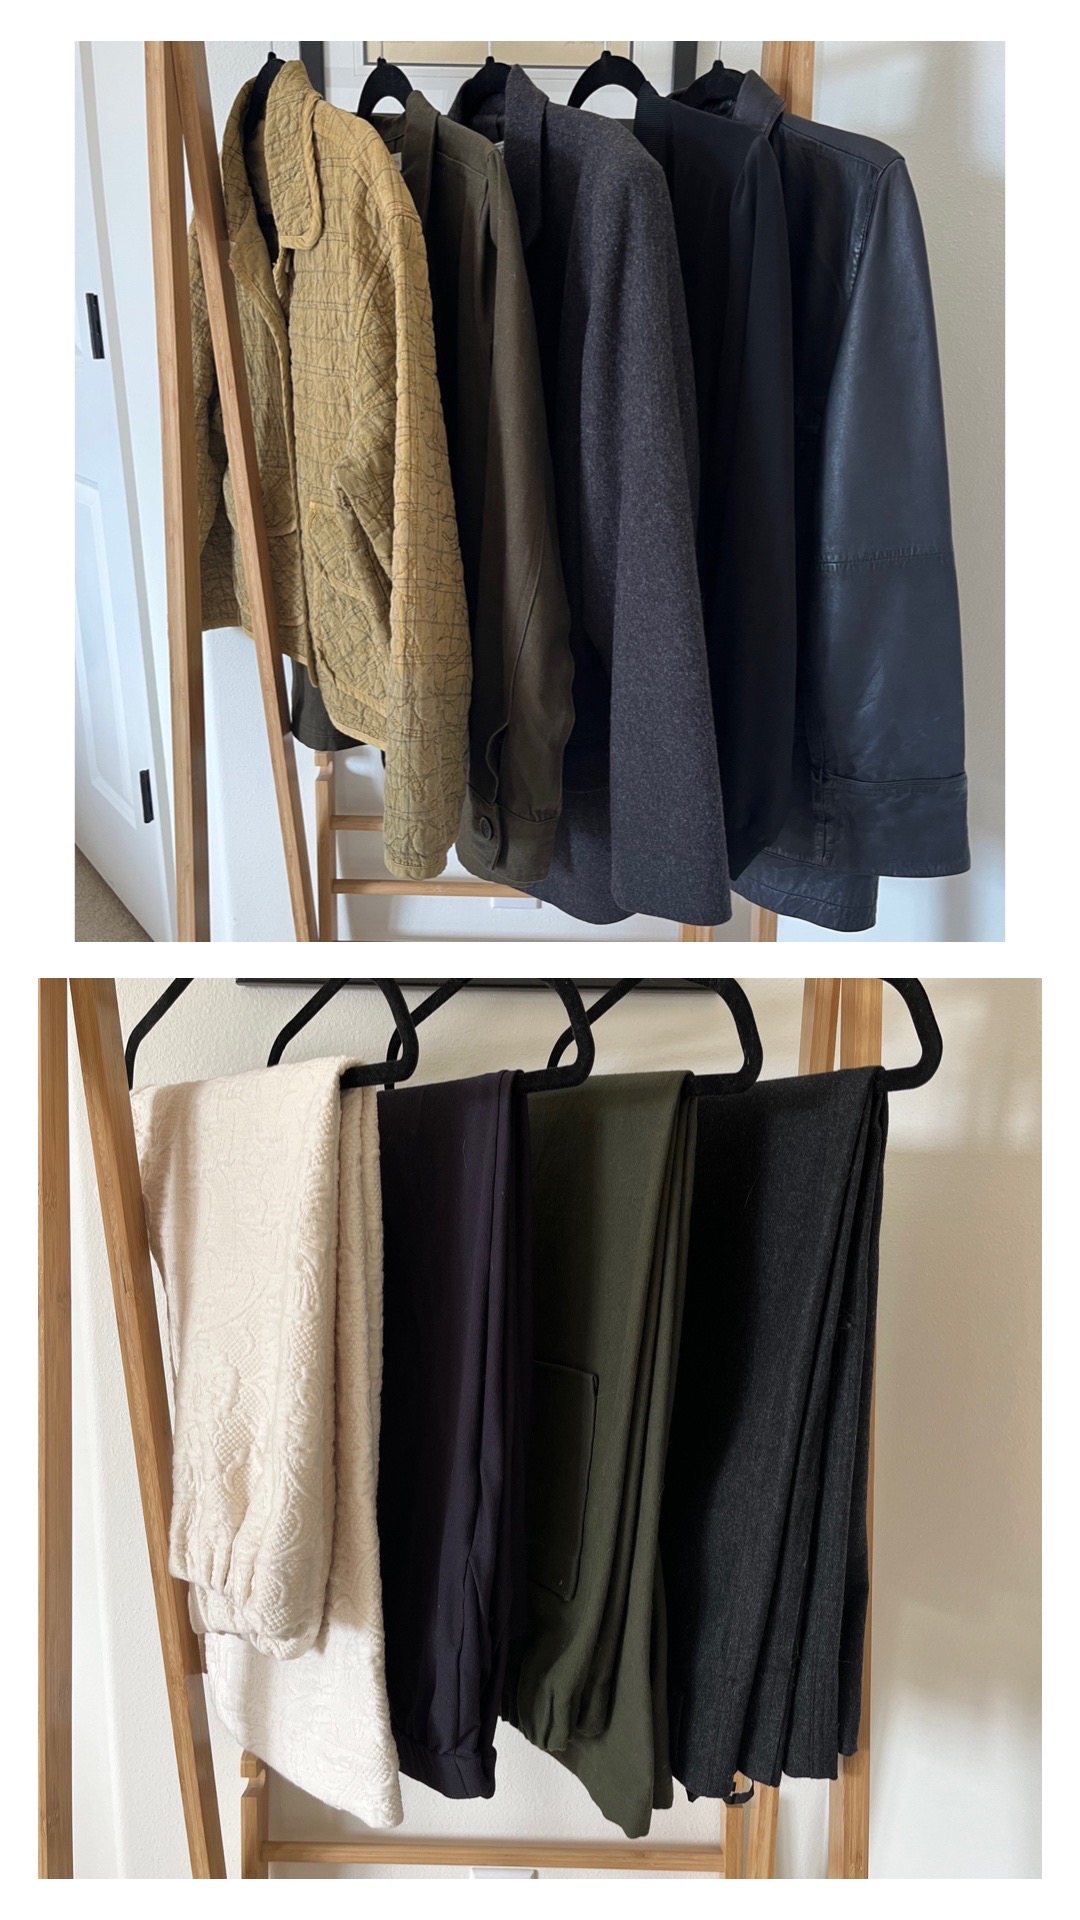 individual categories in my spring capsule wardrobe: there are 2 photos, one on top of the other. The top one has 5 jackets hanging from the railing. The bottom one has pairs of pants hanging from the railing.